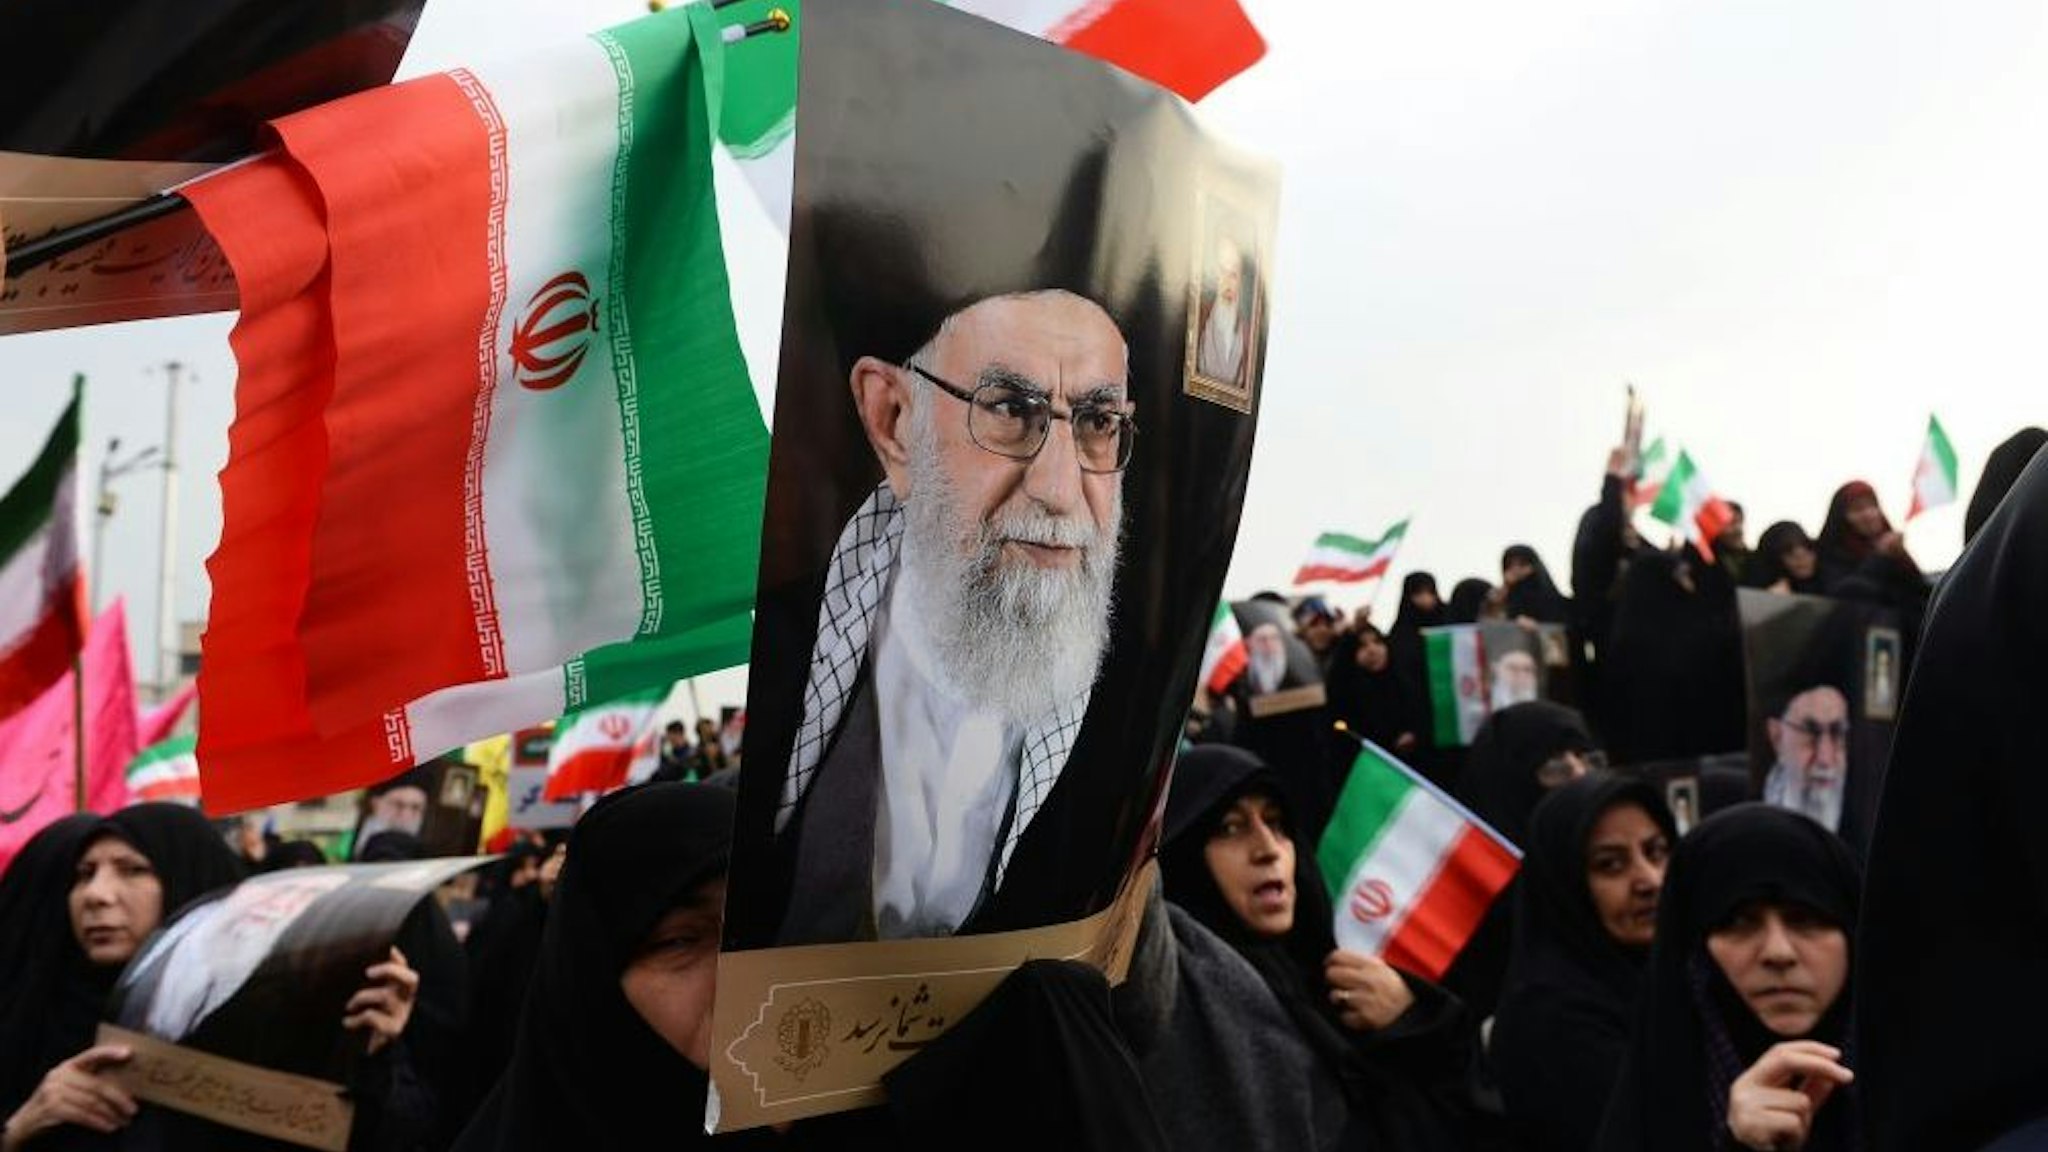 Demonstrators hold posters of Iranian Supreme Leader Ayatollah Ali Khamenei during a pro-government demonstration to react to protests due to fuel price increase of Iran, on November 25, 2019 in Tehran, Iran. (Photo by Fatemeh Bahrami/Anadolu Agency via Getty Images)